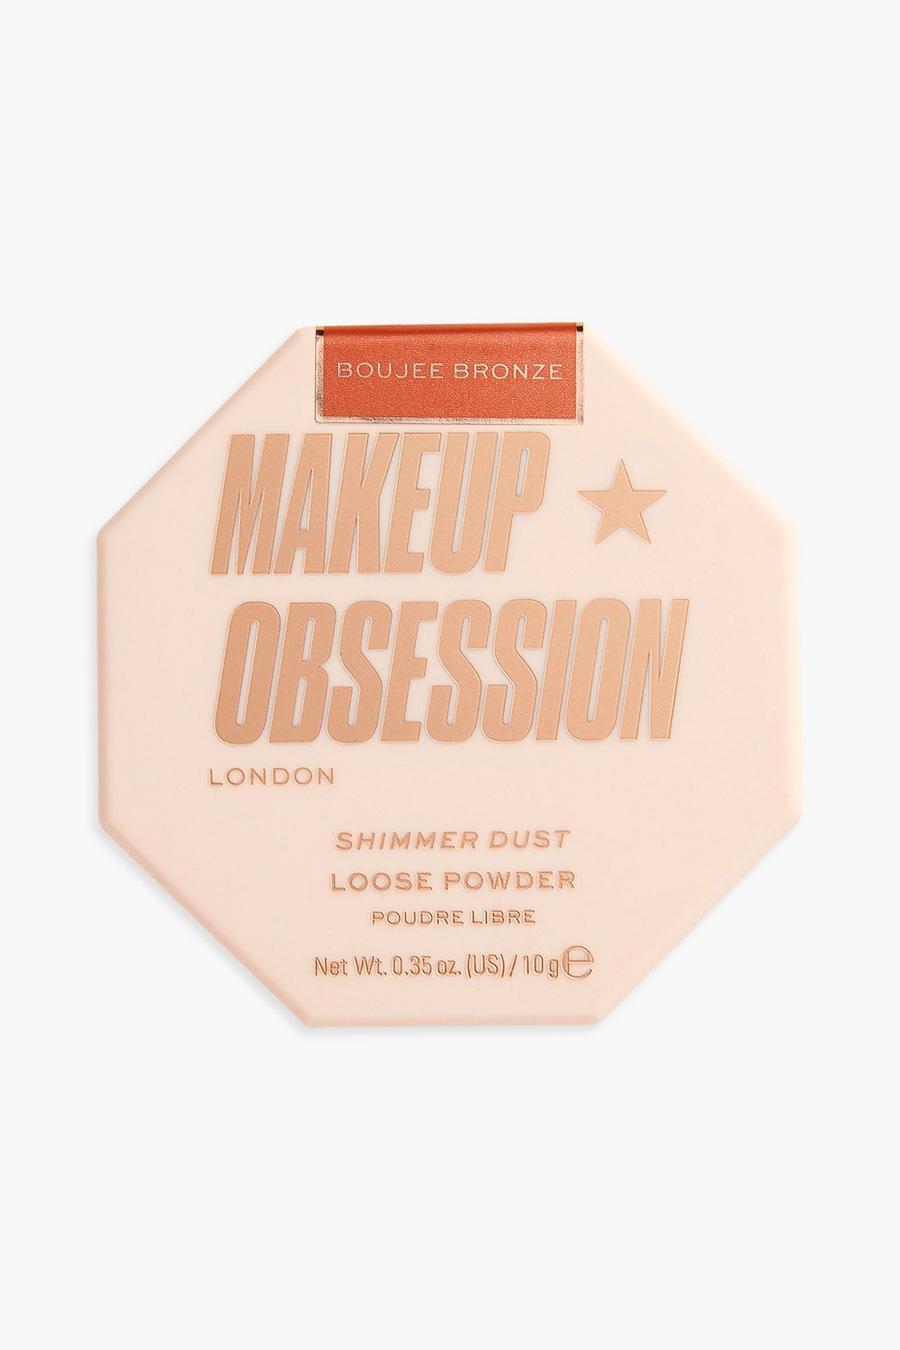 Makeup Obsession Shimmer Dust – Boujee Bronze, Mehrfarbig multi